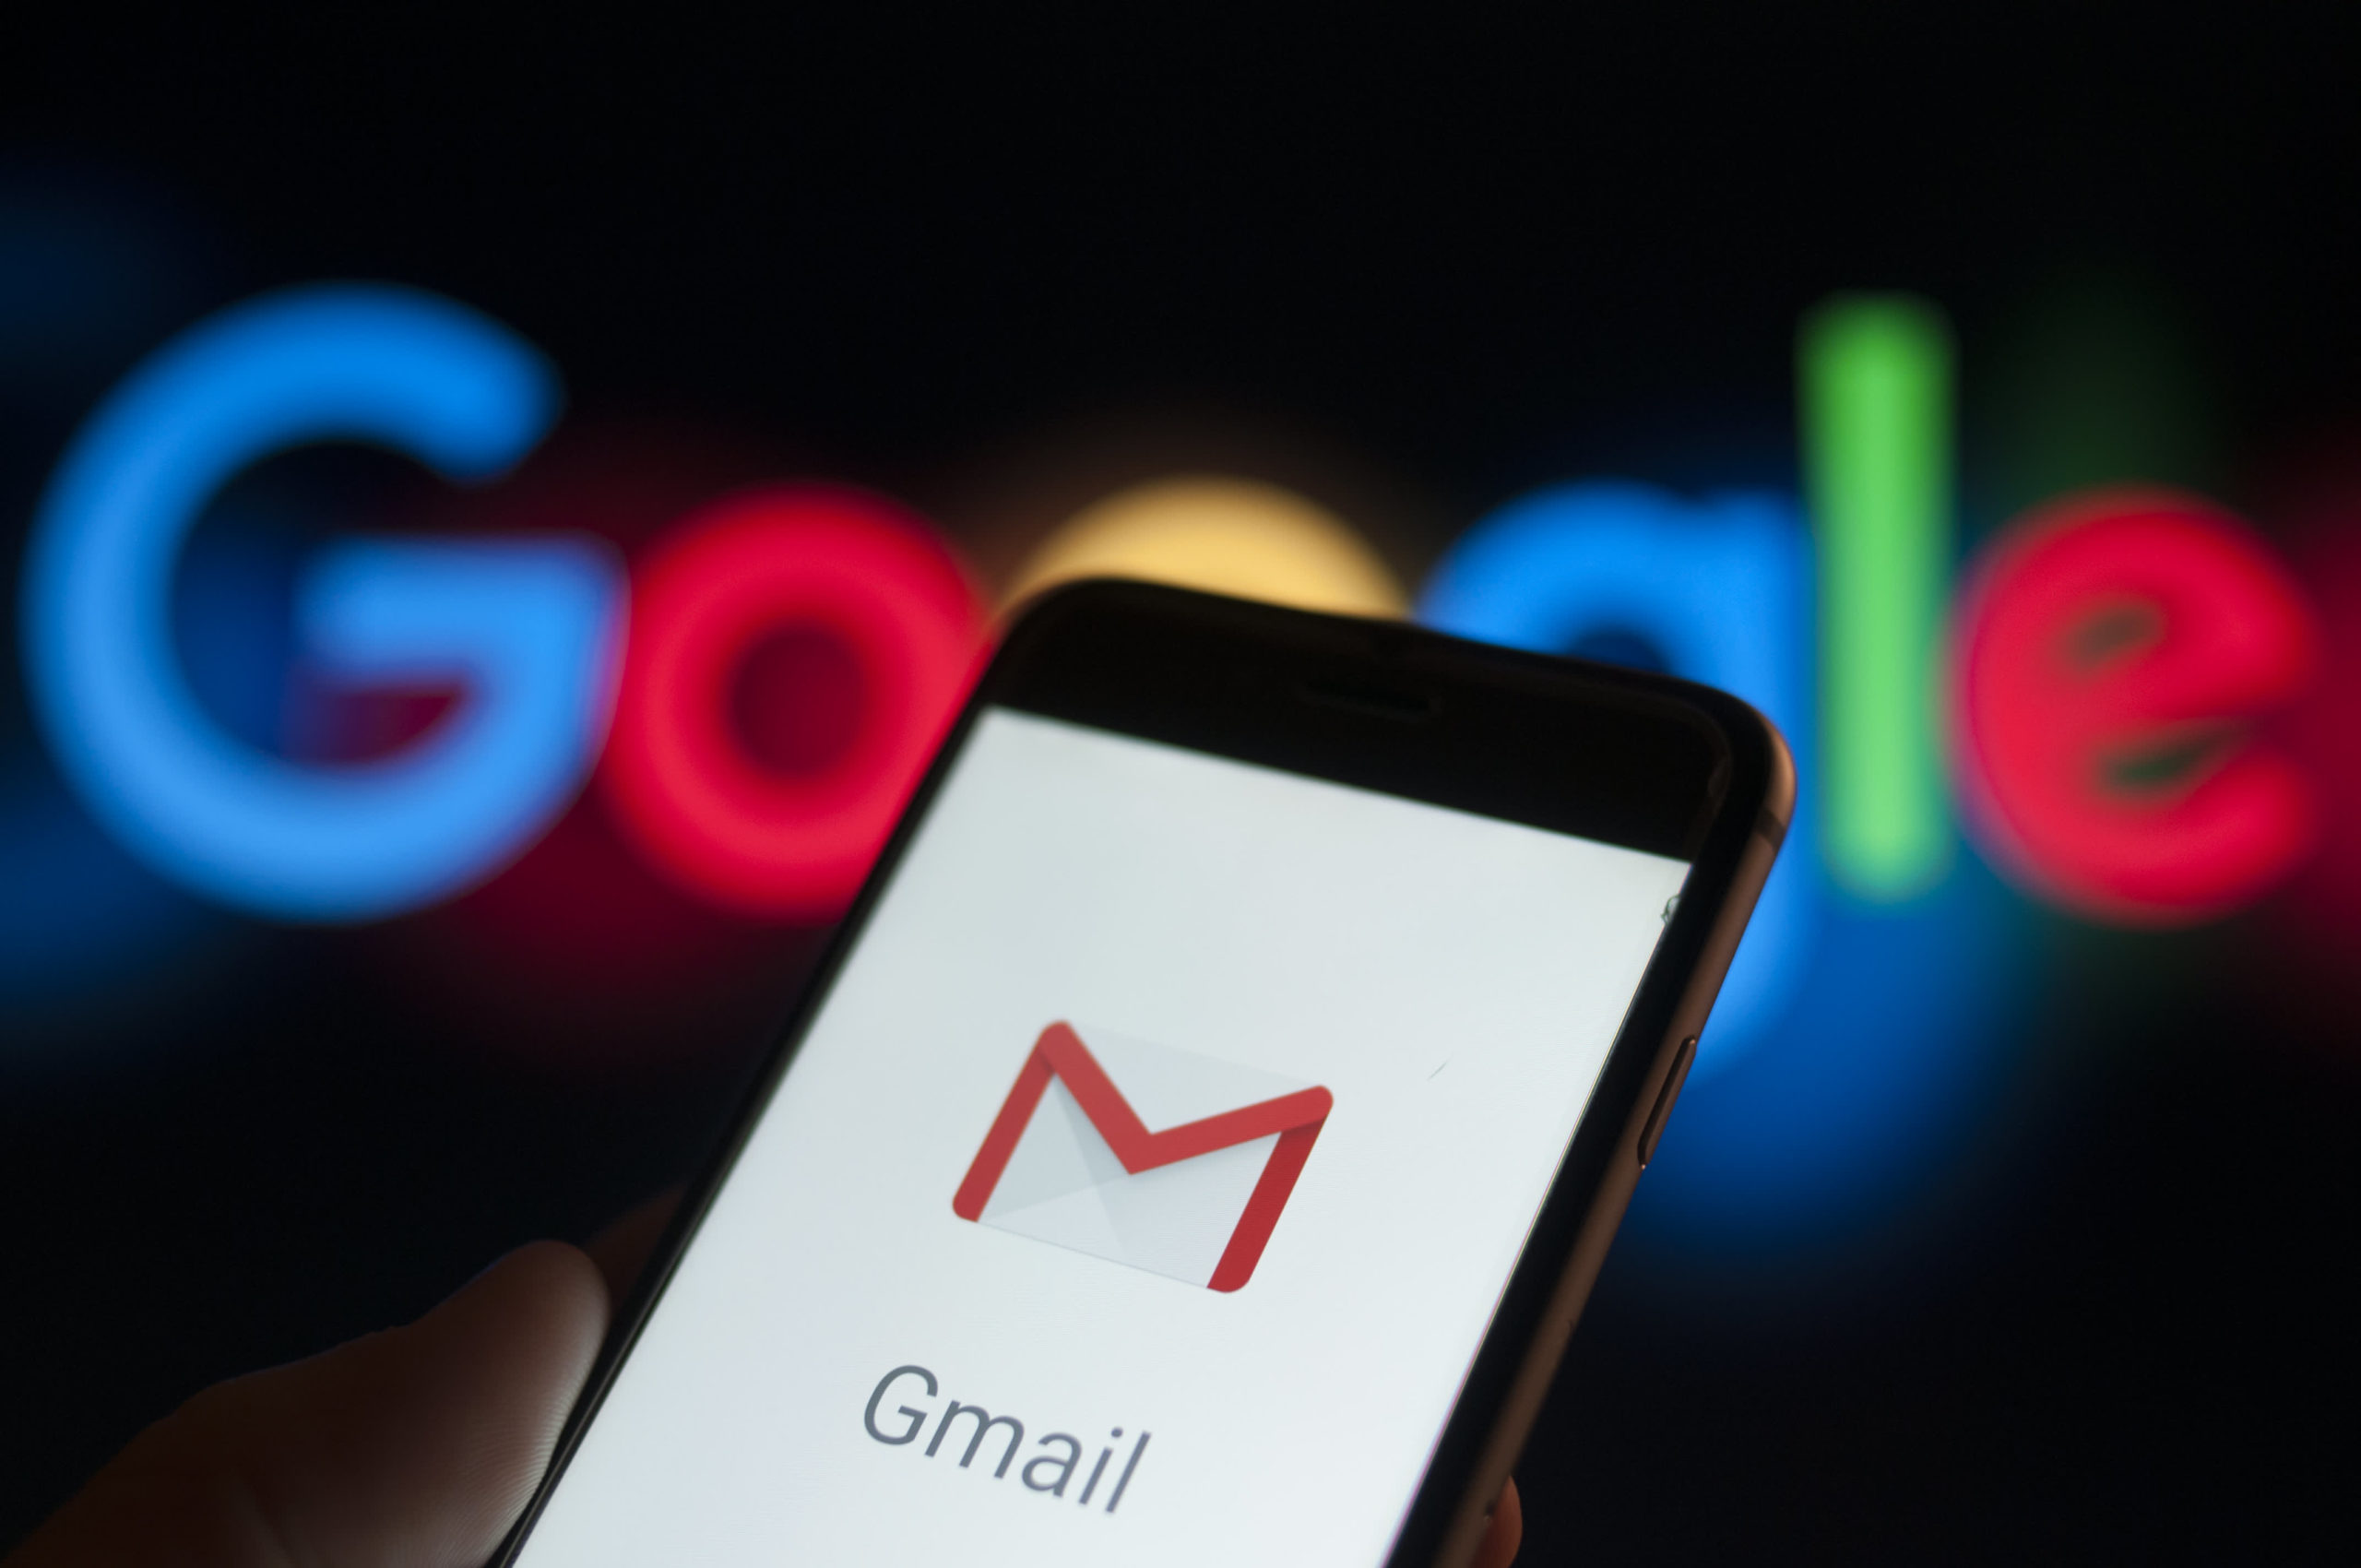 Did you receive an email that was too long?  GPT in Gmail gives a good summary